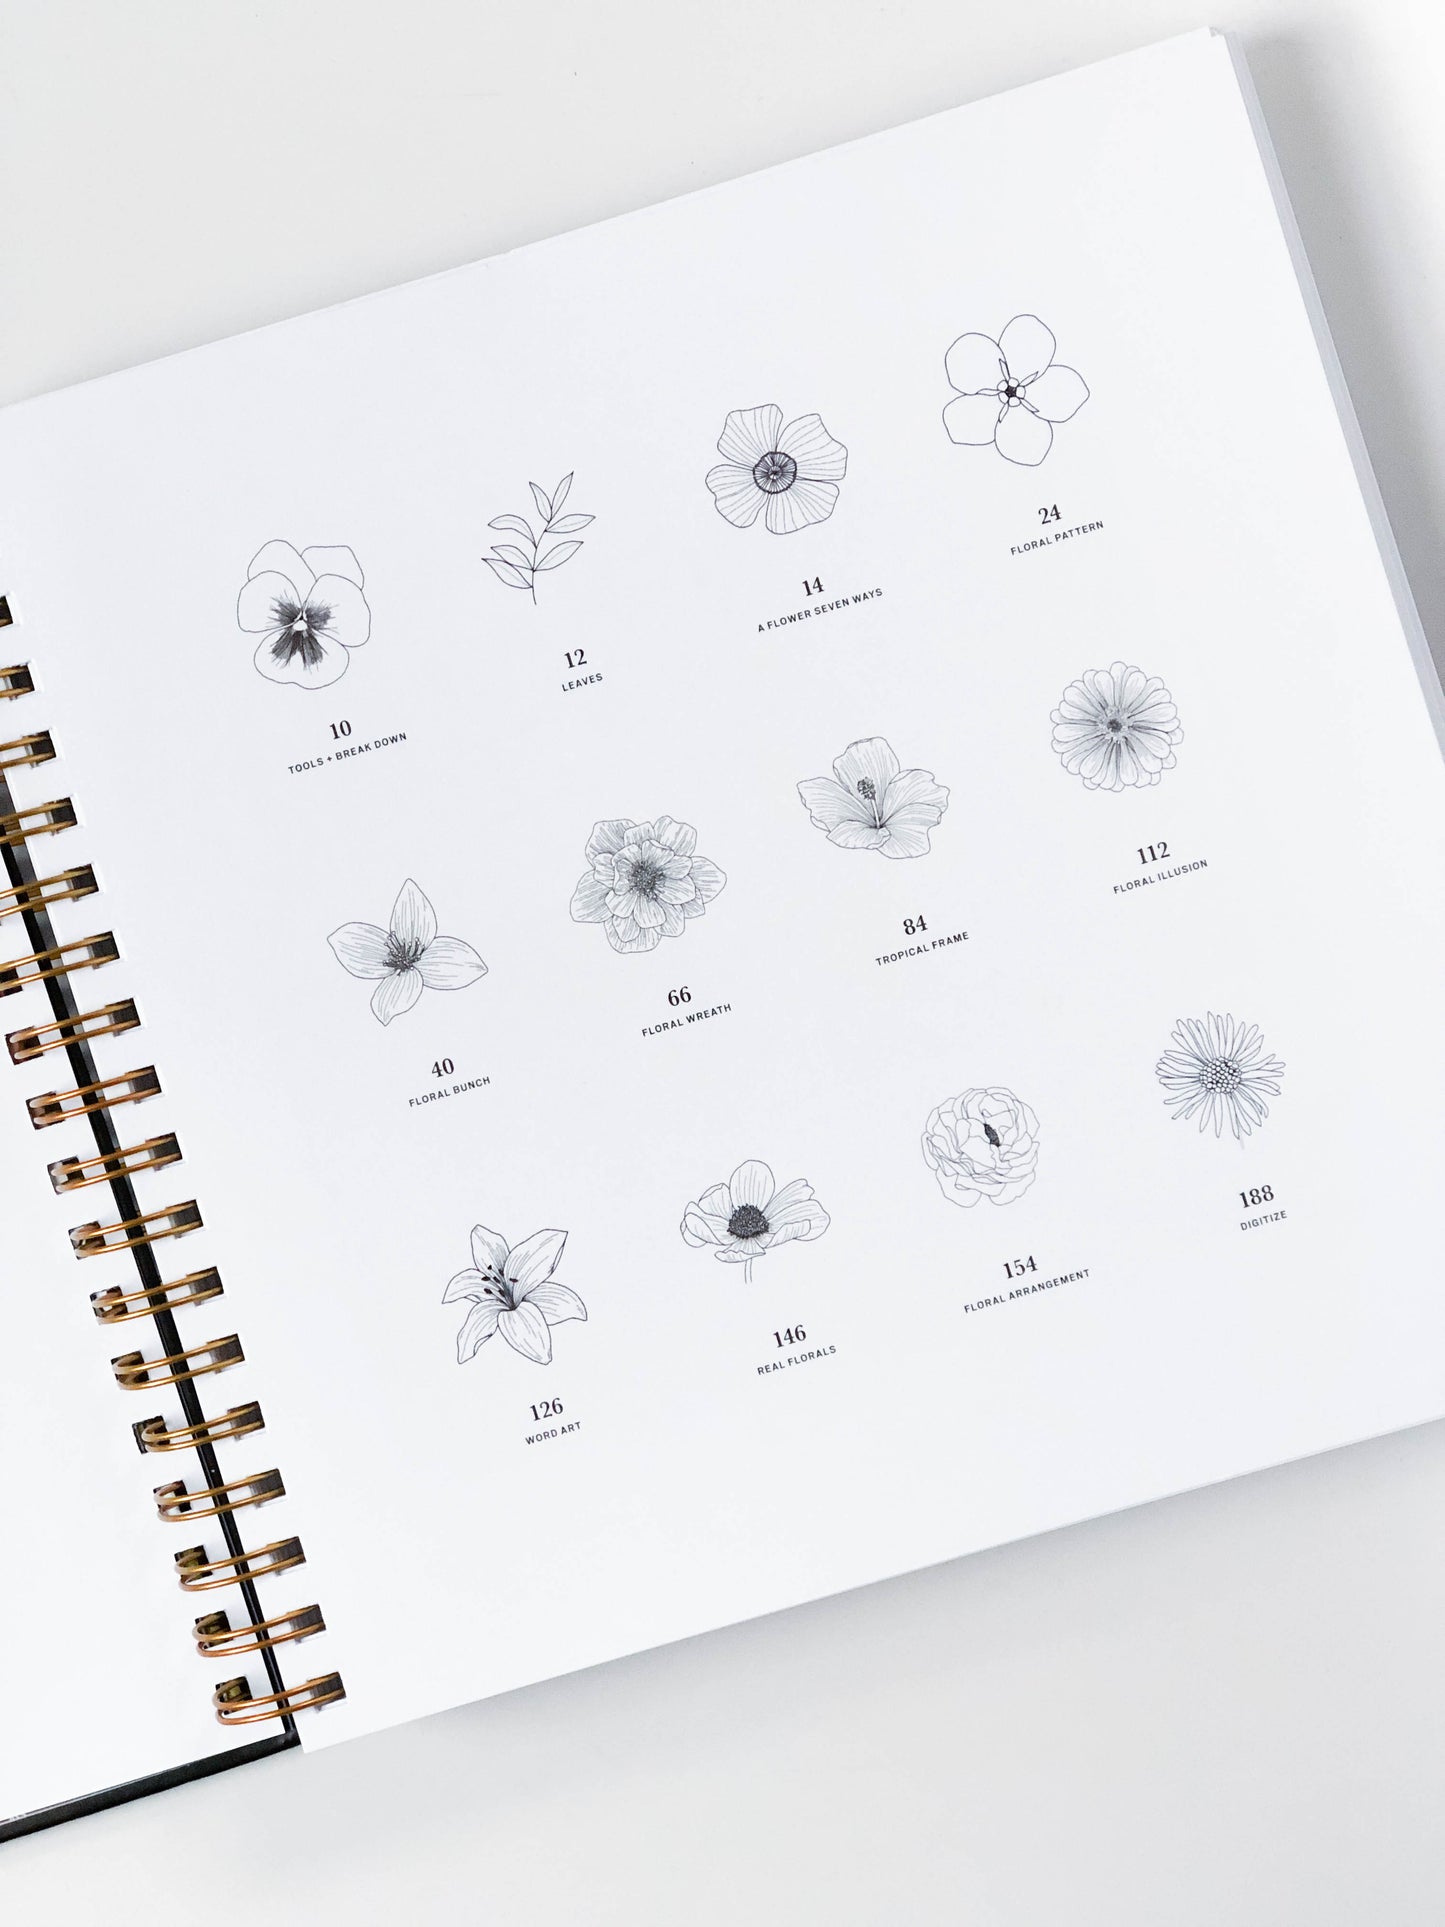 Florals By Hand | How to Draw and Design Modern Floral Projects